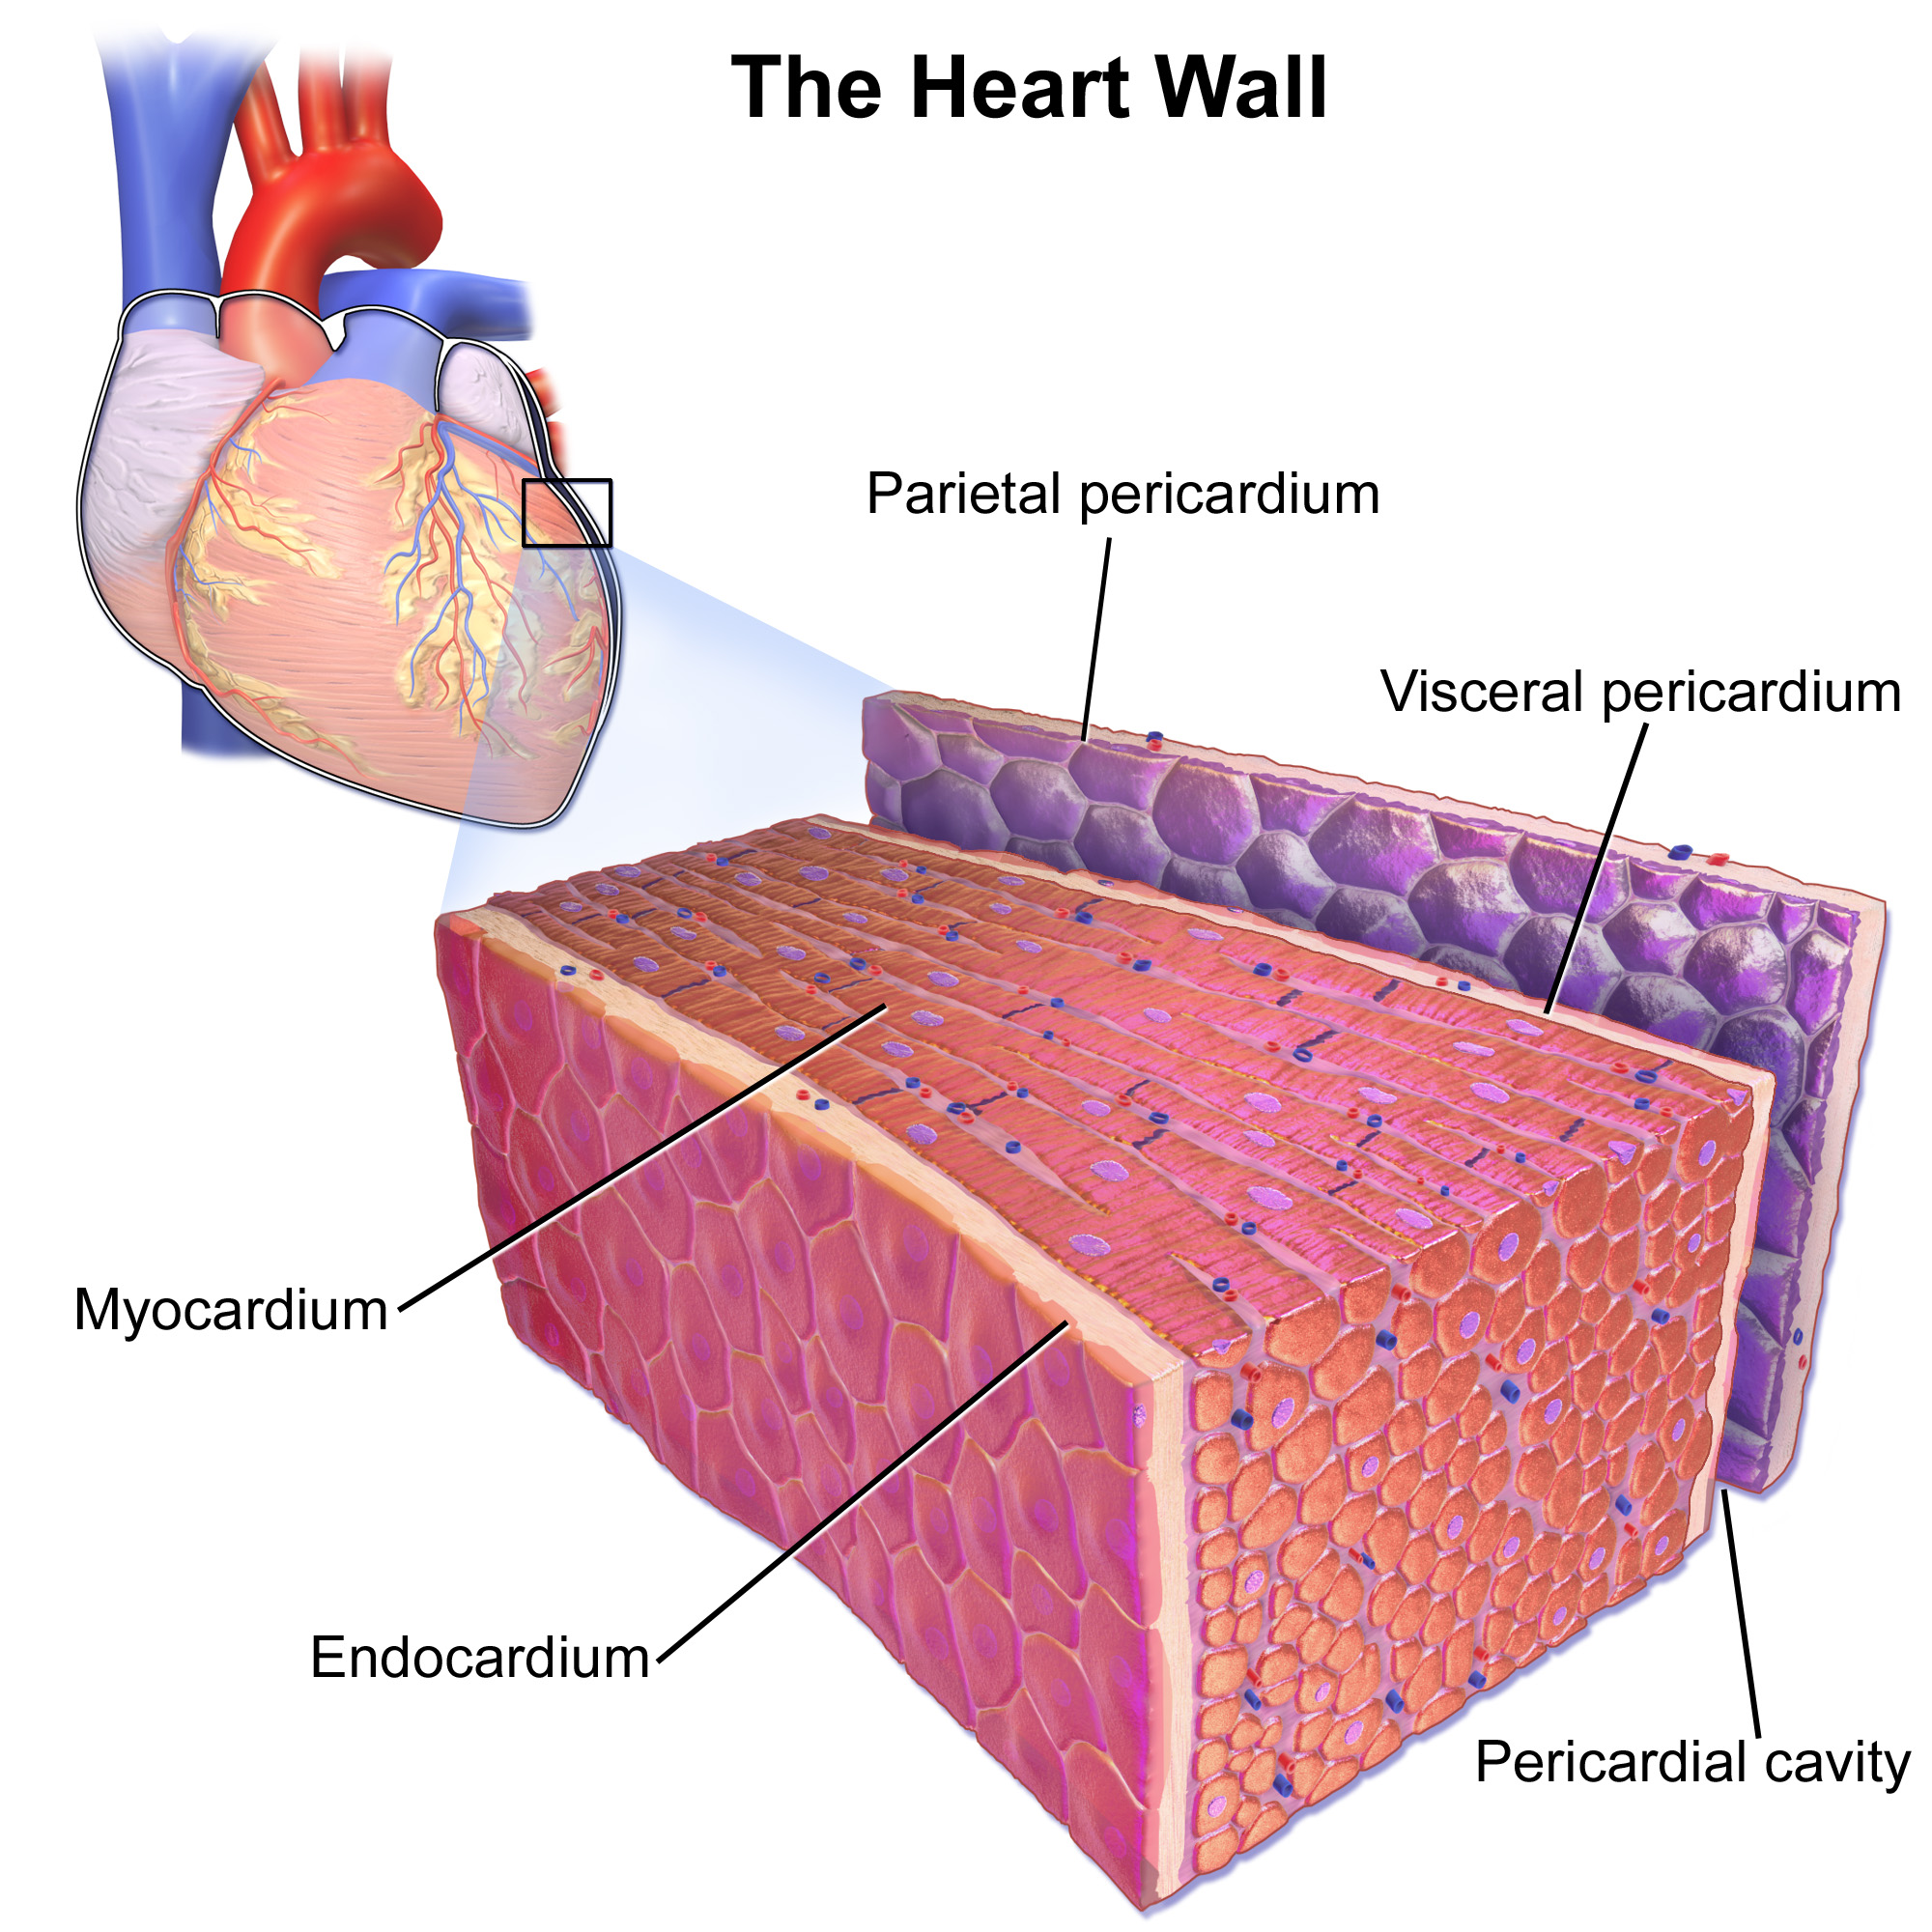 14.3.2 Layers of the Heart Wall